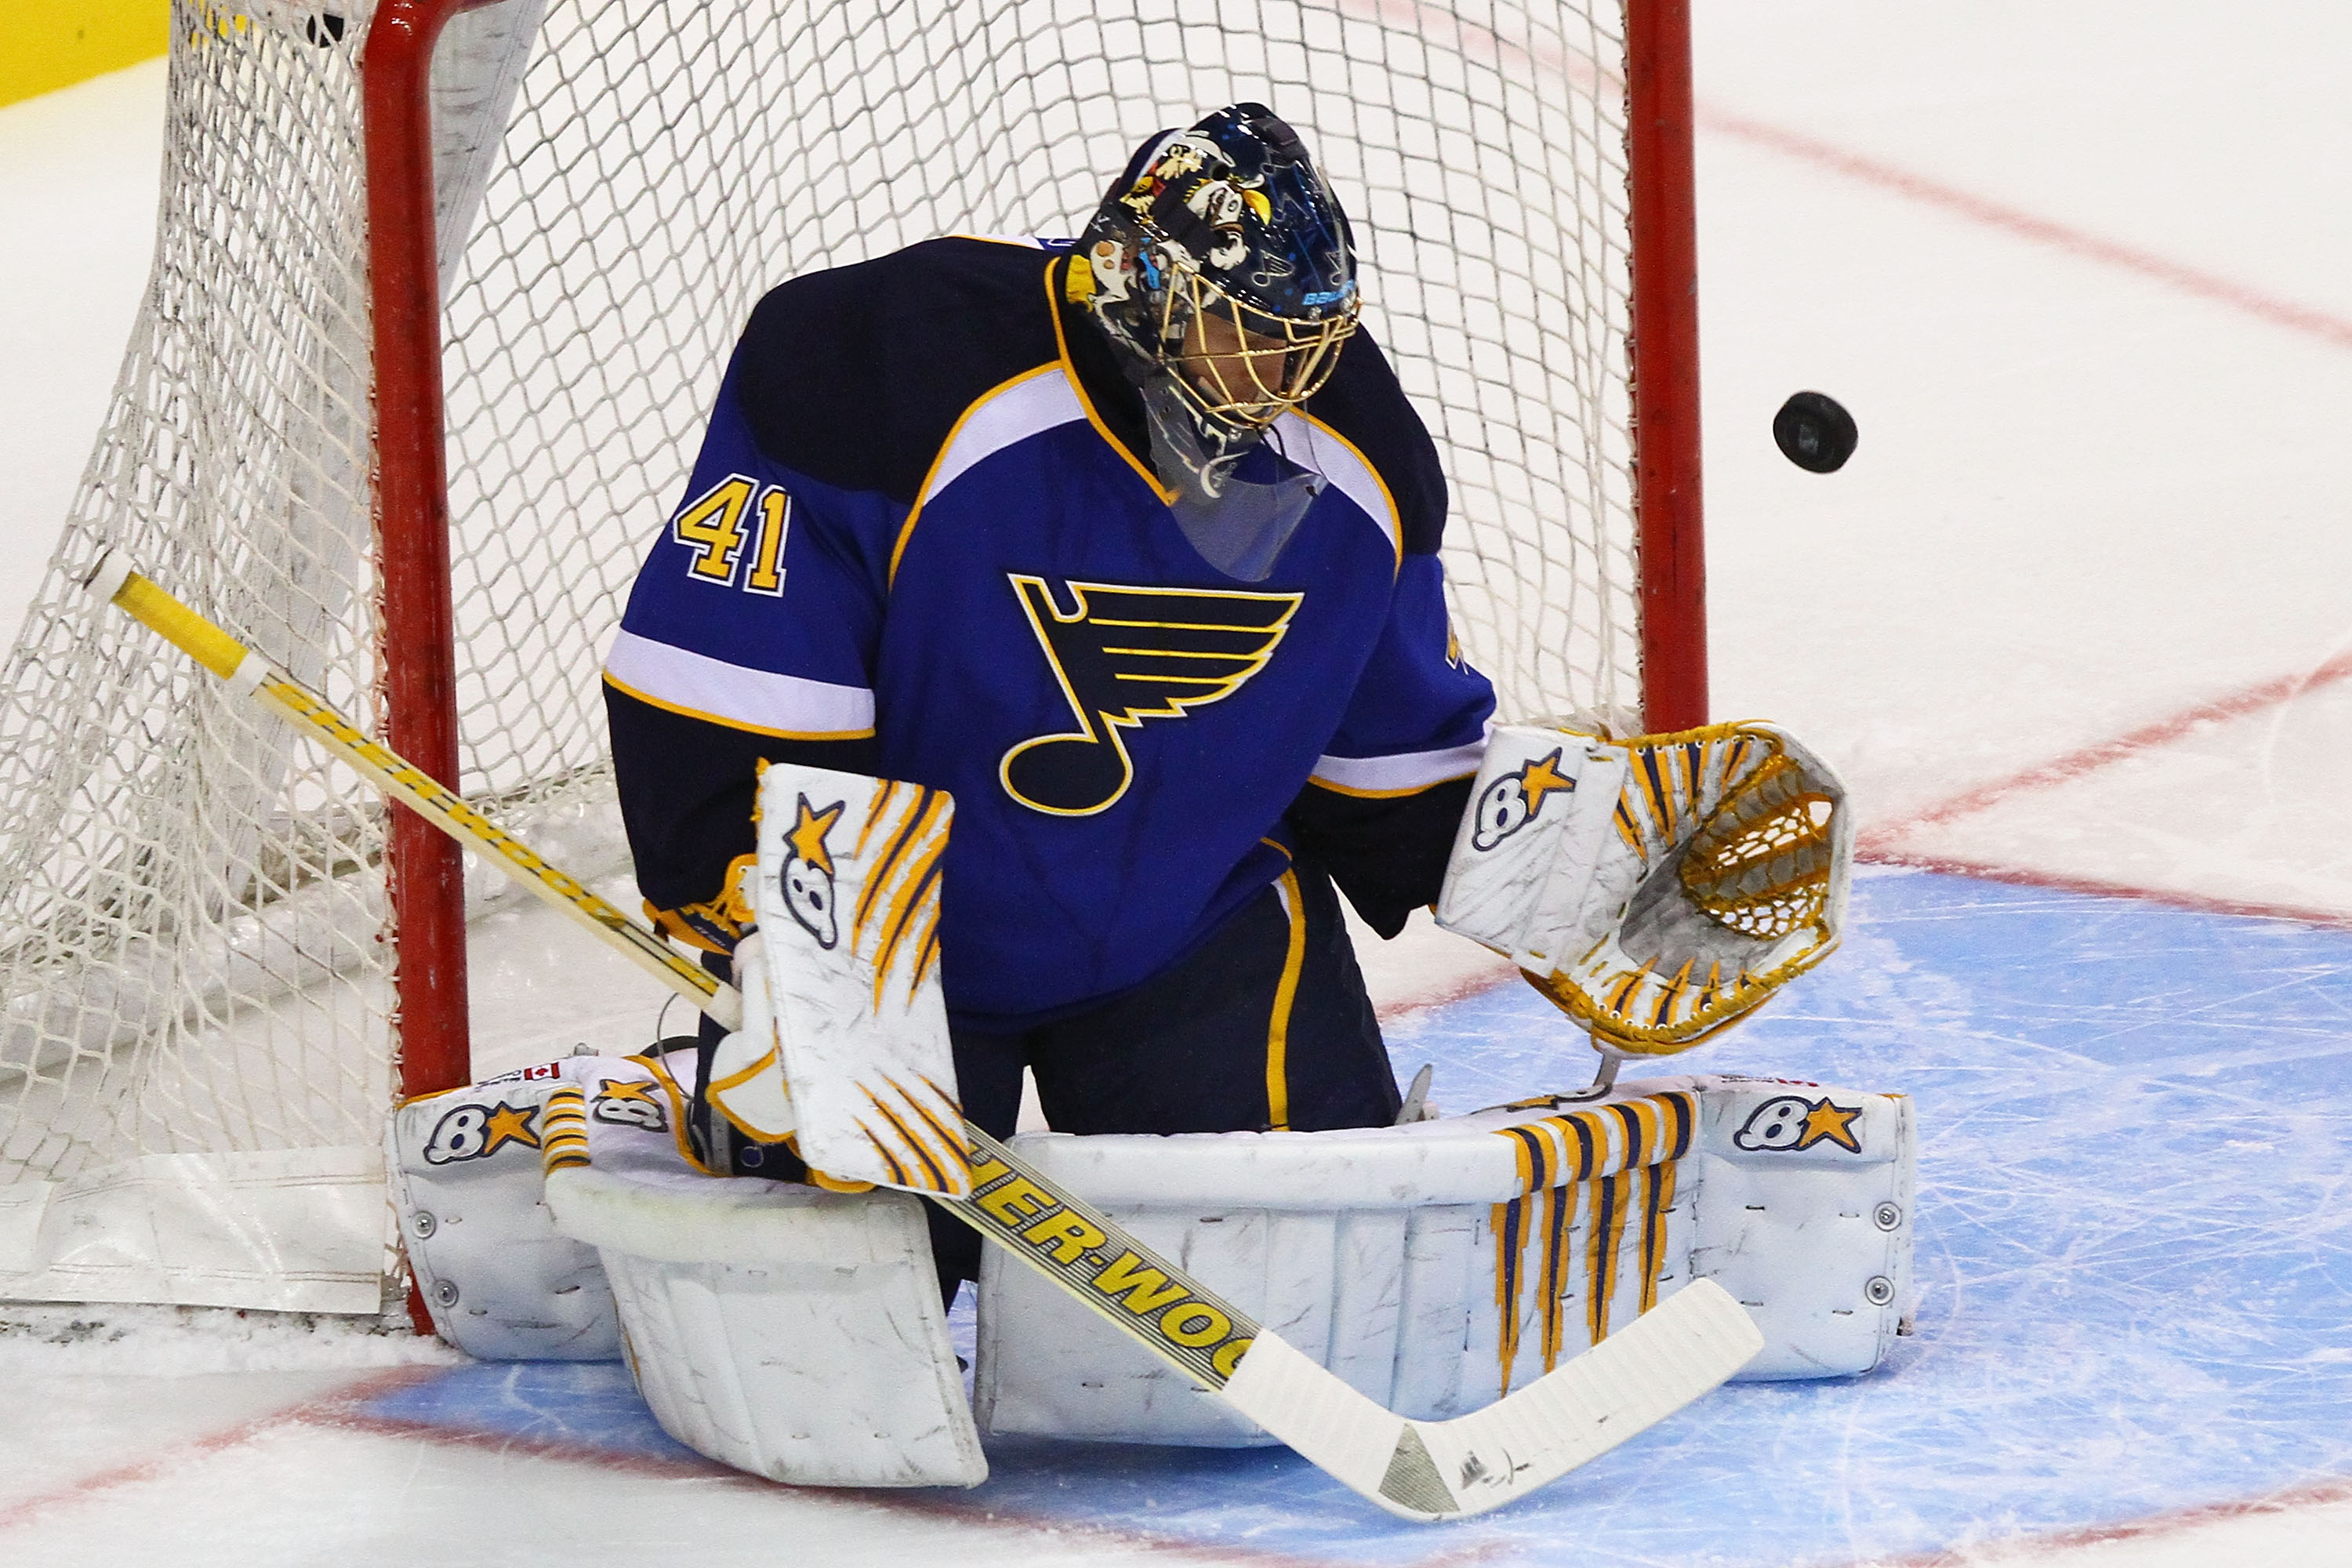 Jaroslav Halak vs. Carey Price How Are NHL Decisions Working Out